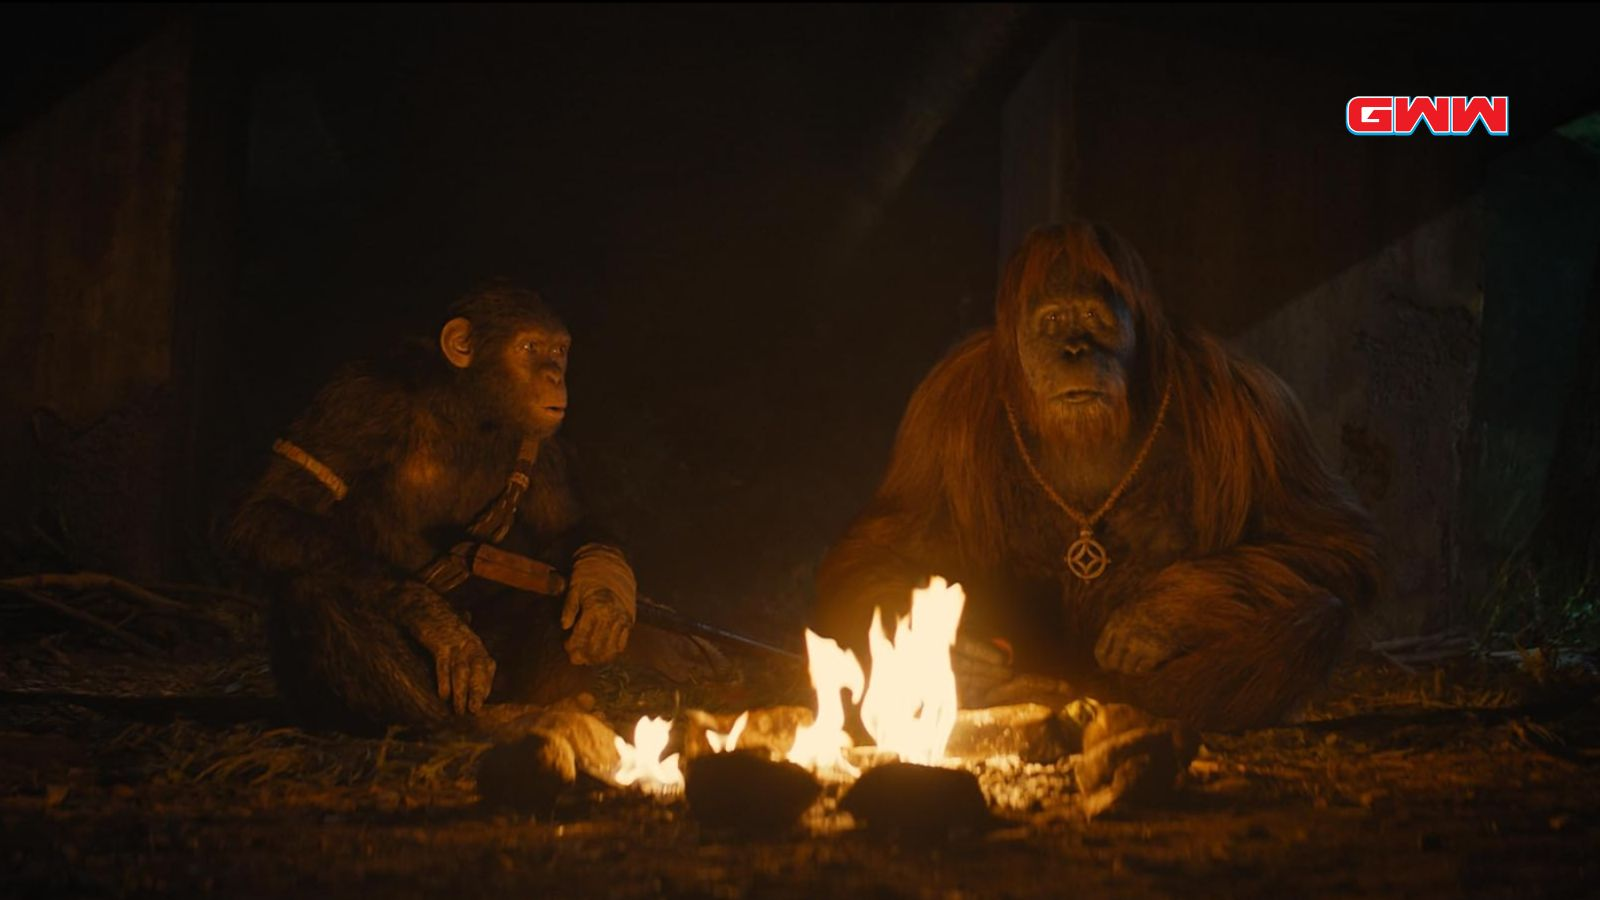 Noa and Raka played by Owen Teague and Peter Macon, Cast of Kingdom of the Planet of the Apes